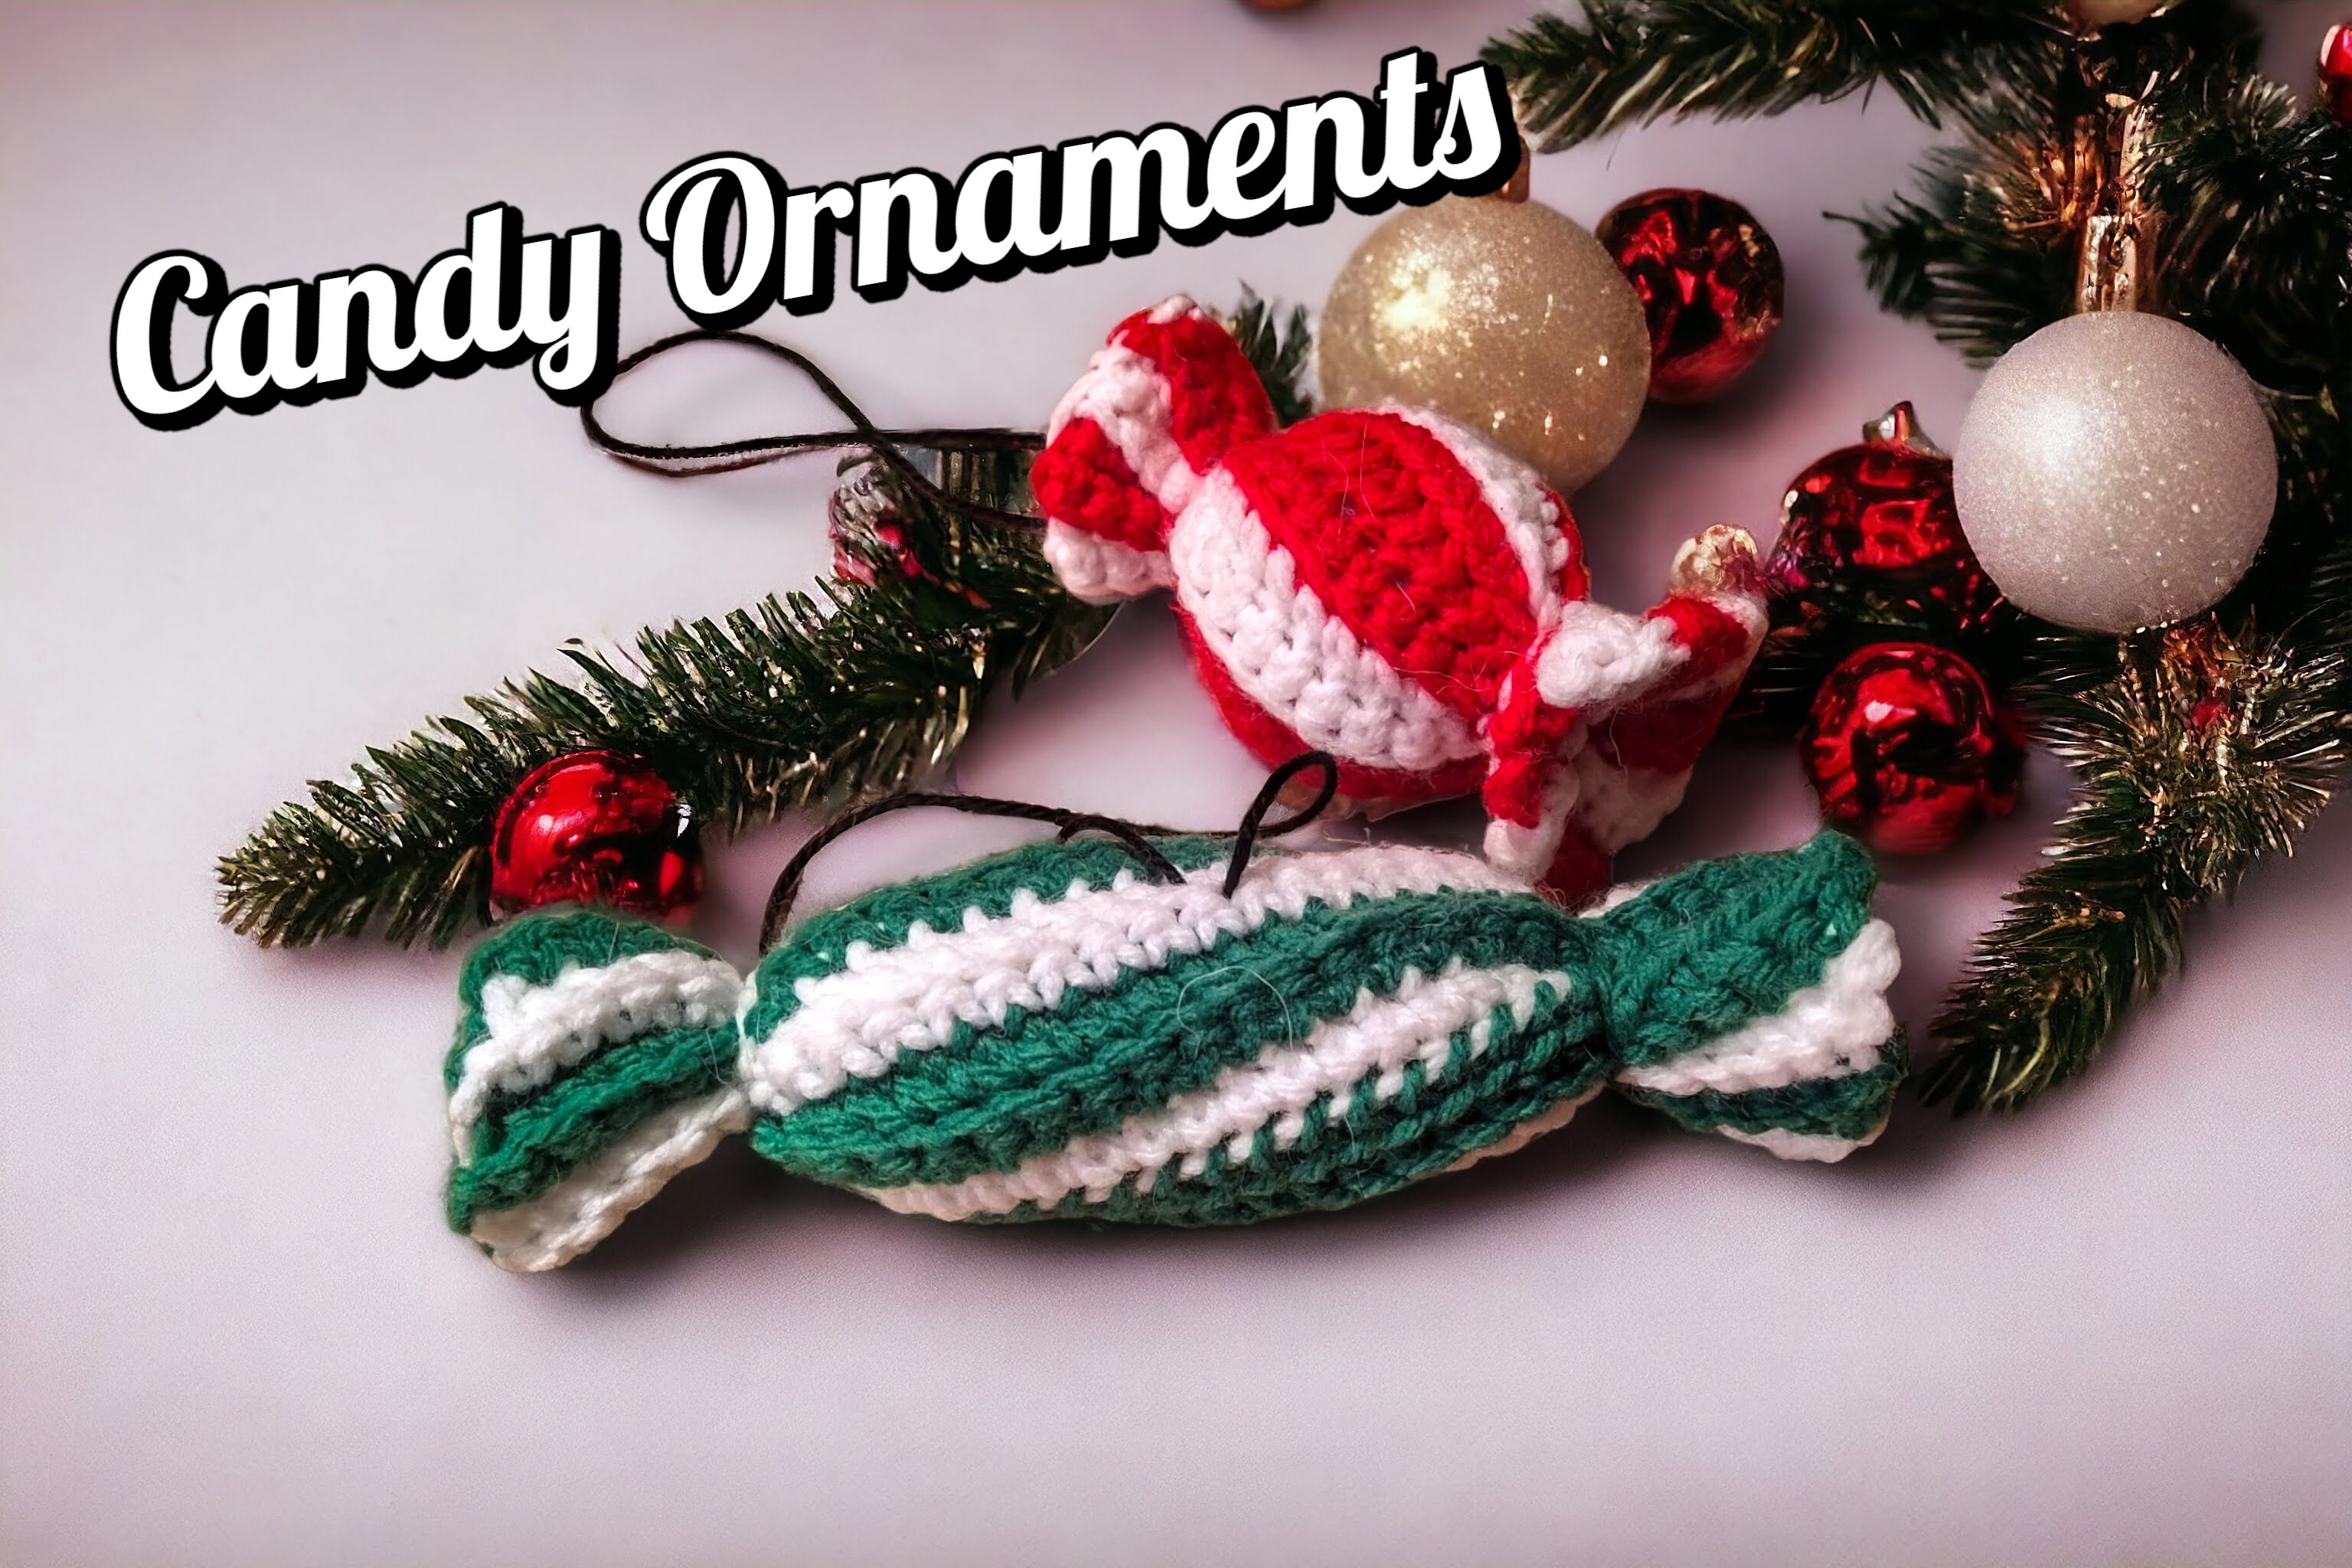 How to Make Candy Ornaments